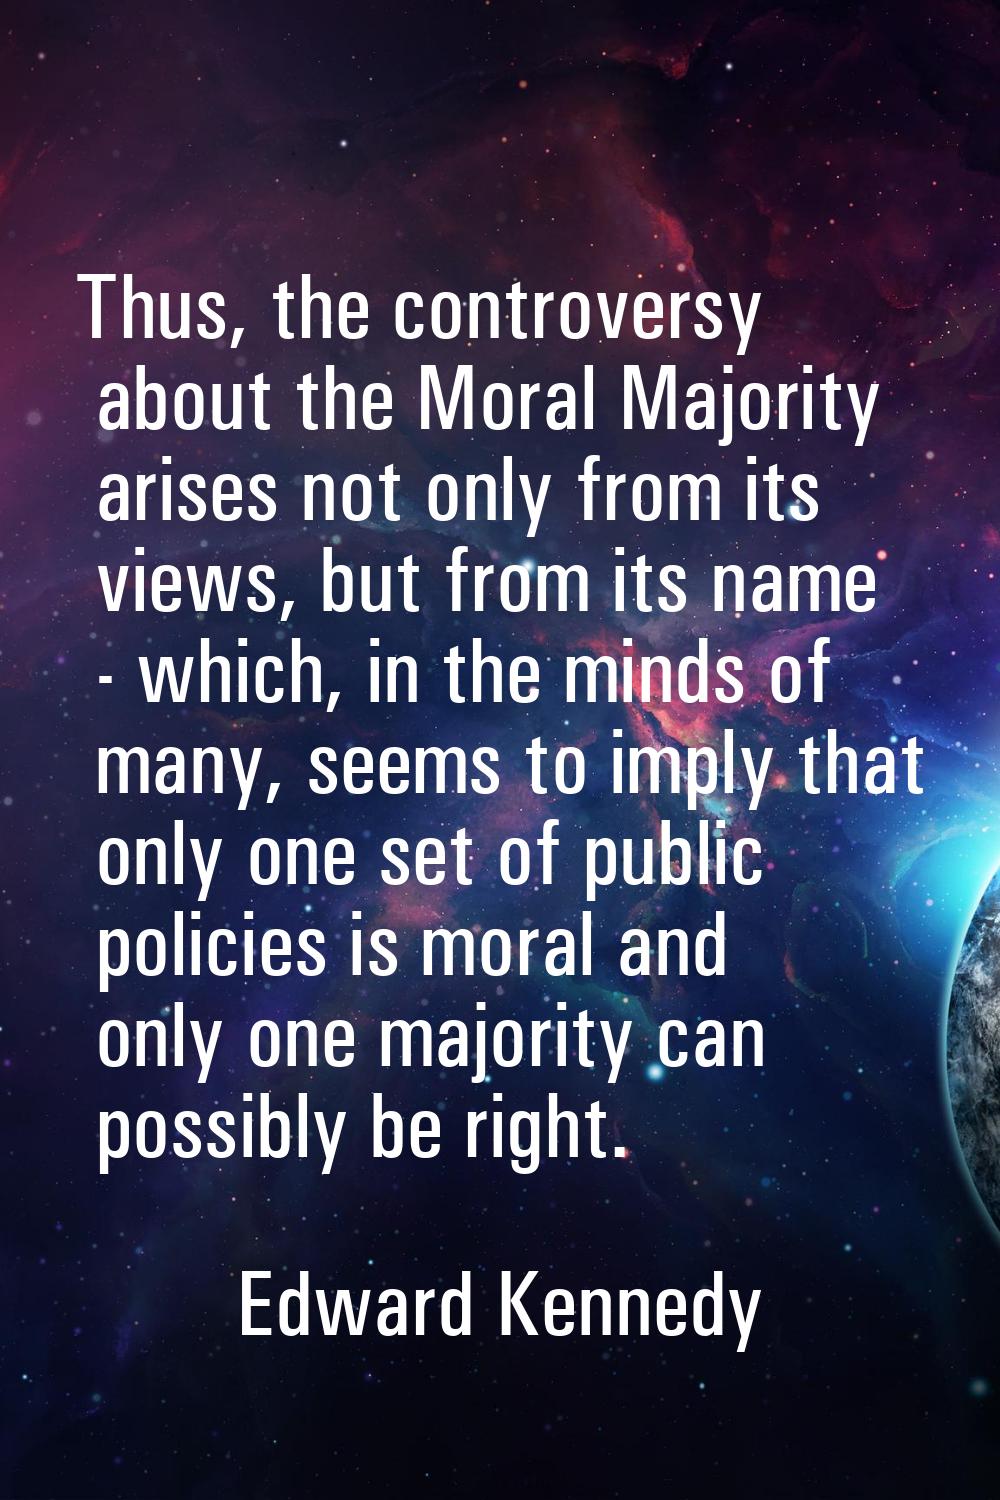 Thus, the controversy about the Moral Majority arises not only from its views, but from its name - 